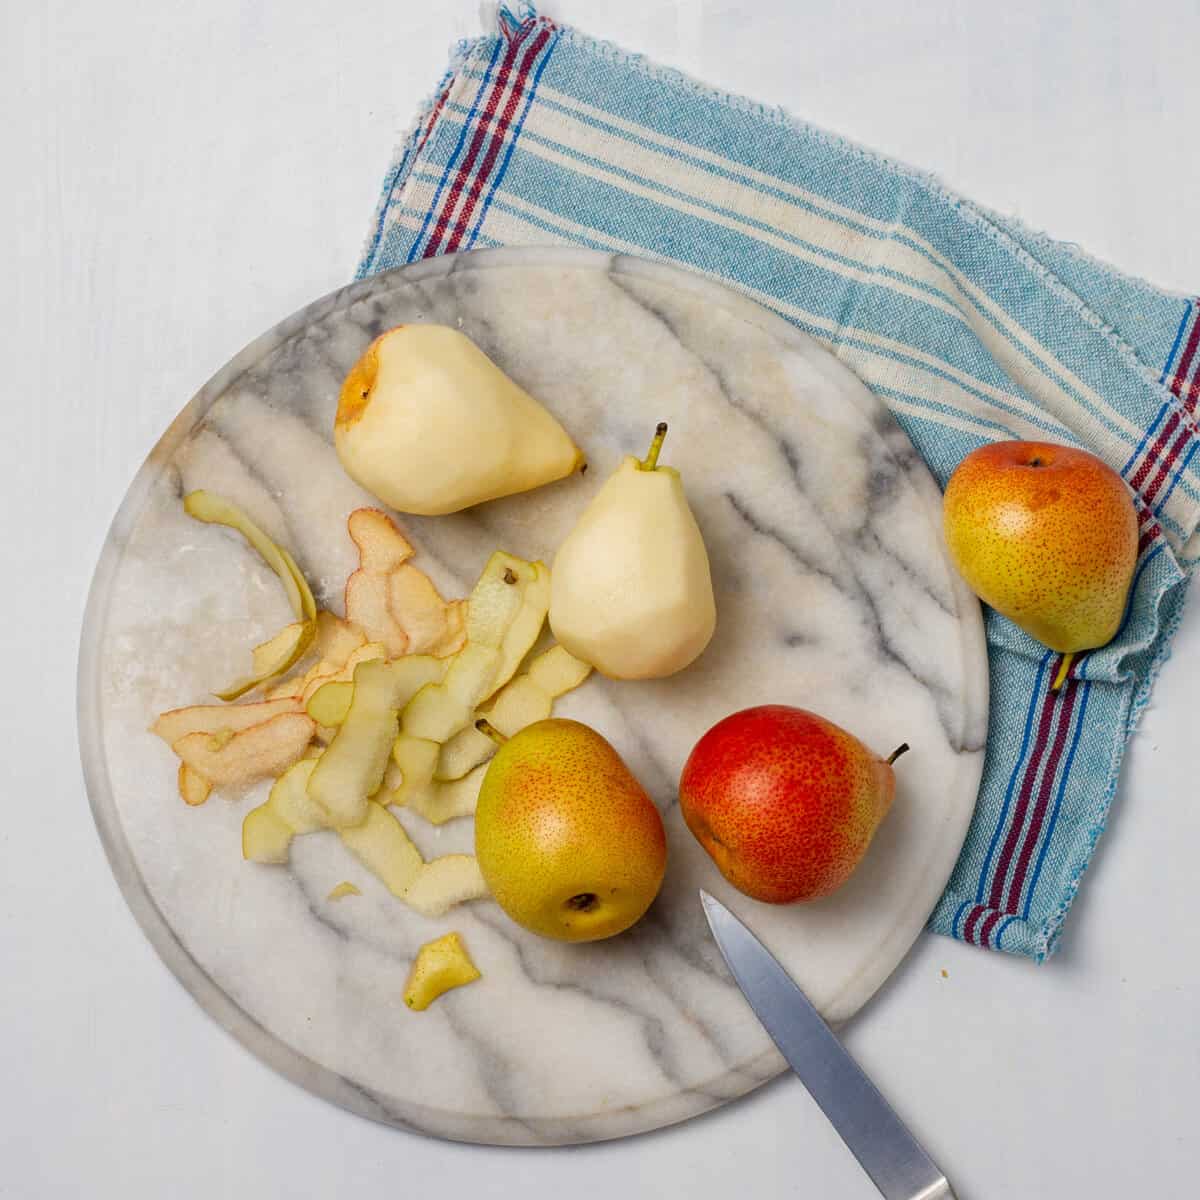 Peel the pears but leave them whole.